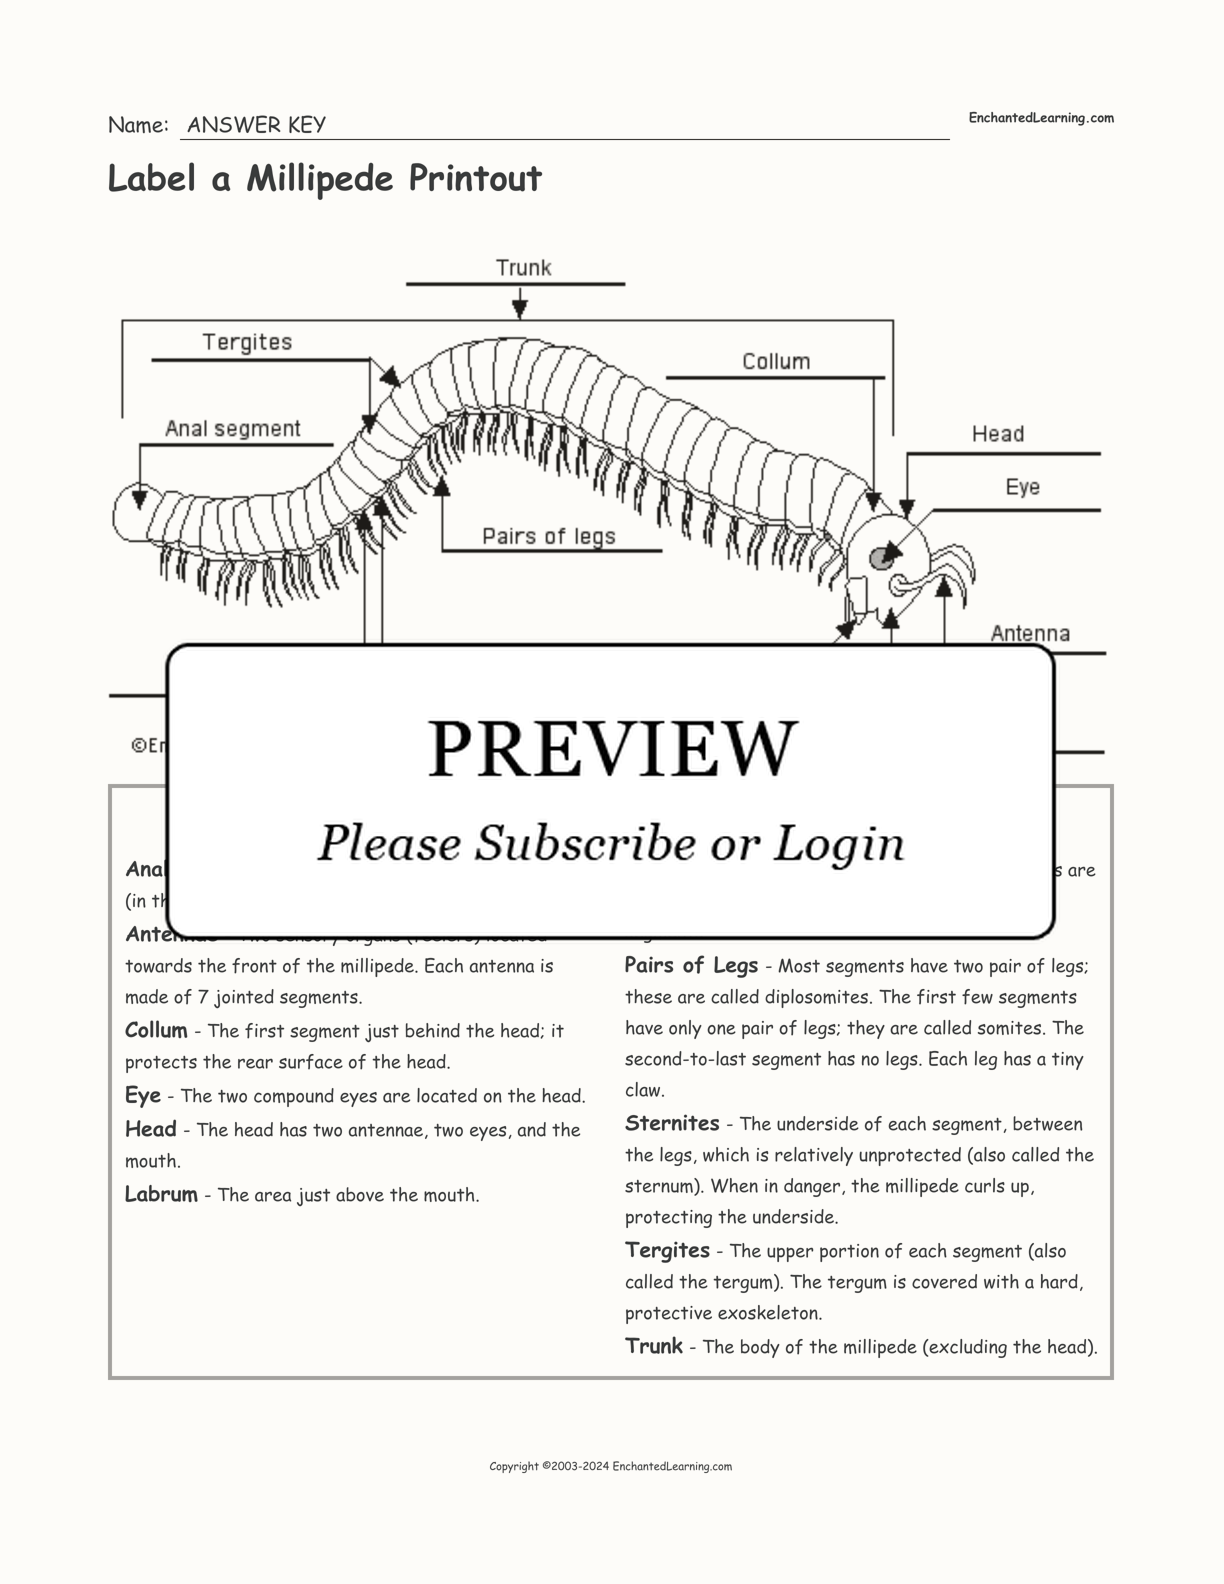 Label a Millipede Printout interactive worksheet page 2